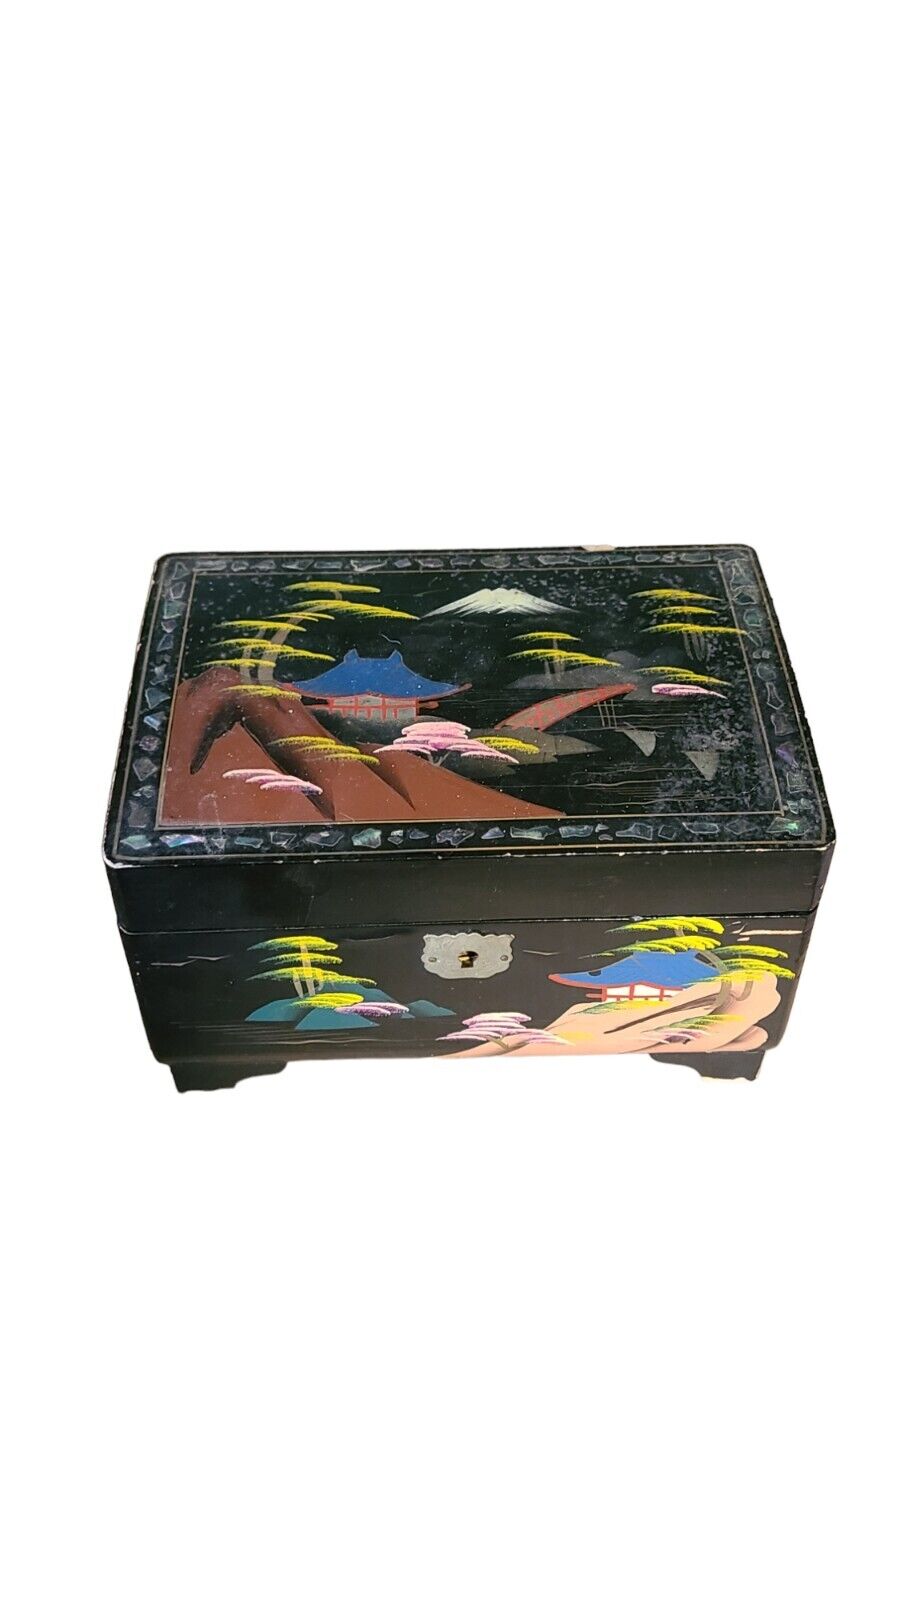 Vintage Handpainted Japan Music Box Lacquer Wood 8